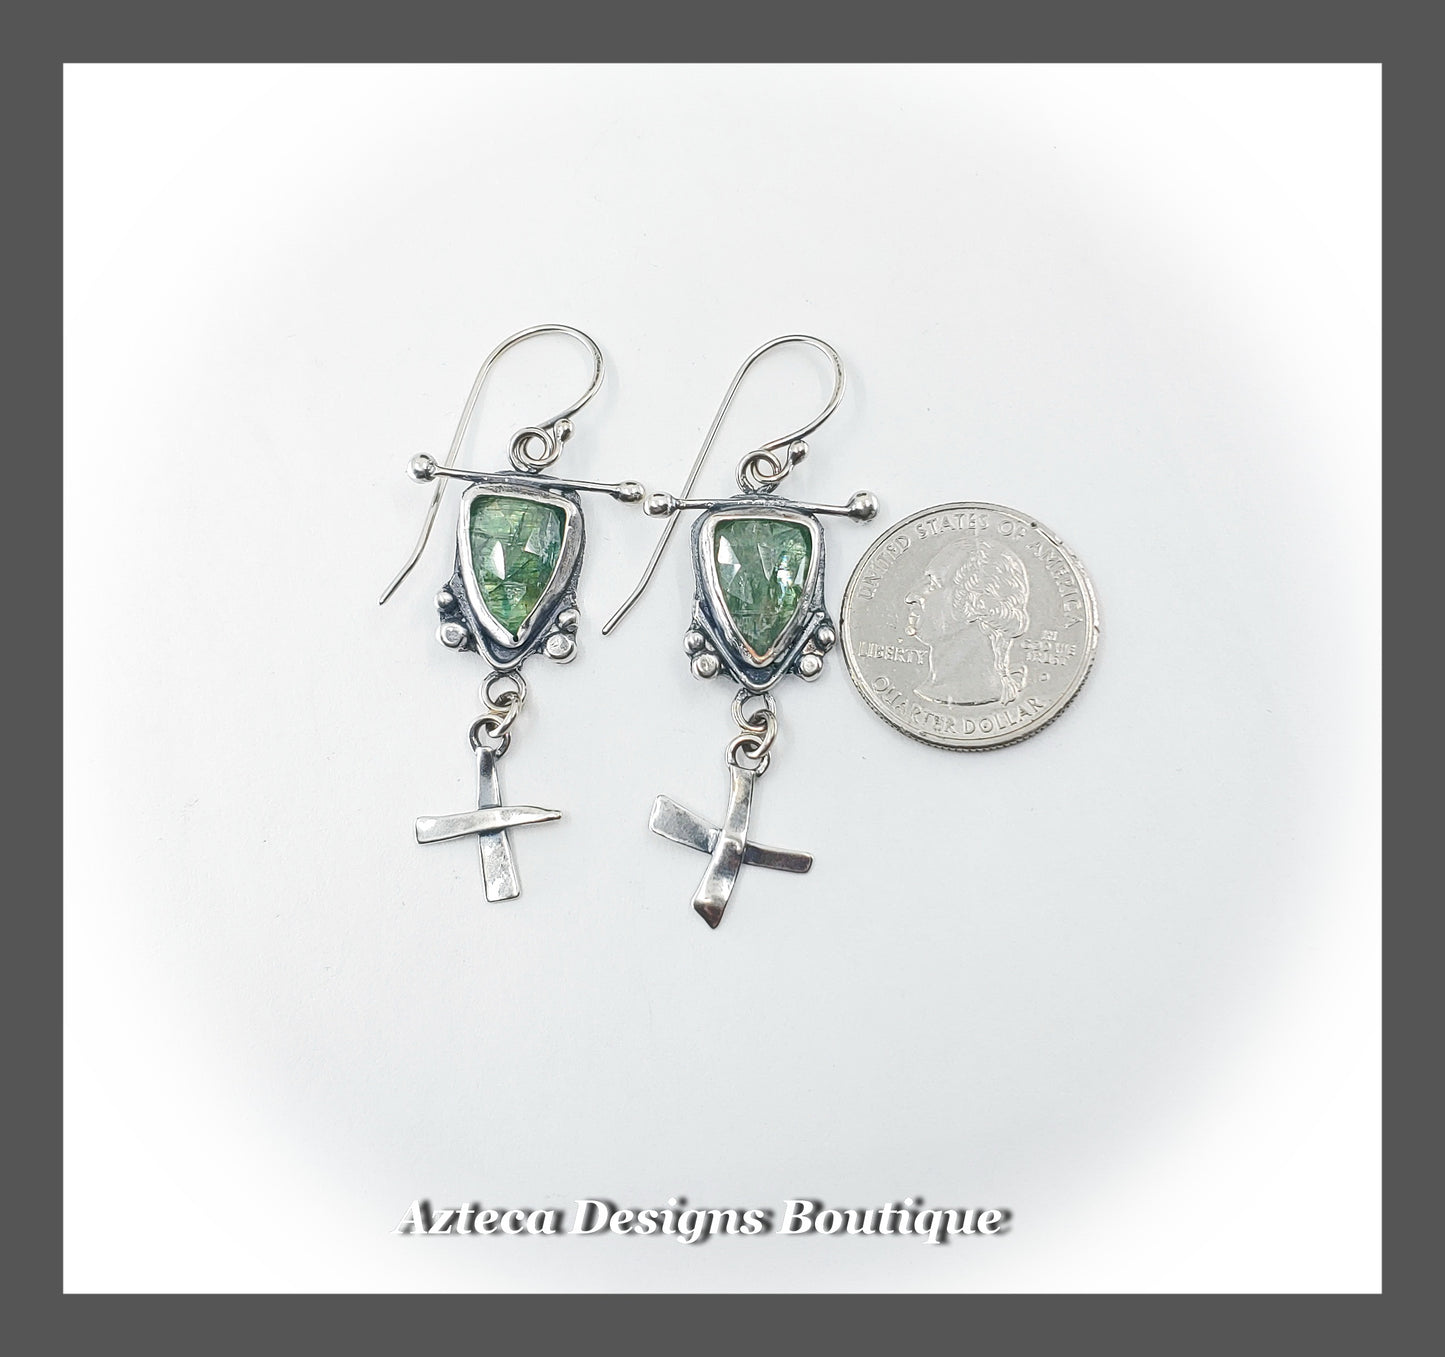 Ancient Tales Told + Mint Green Kyanite Hand Fabricated Argentium Silver Shield Cross Earrings